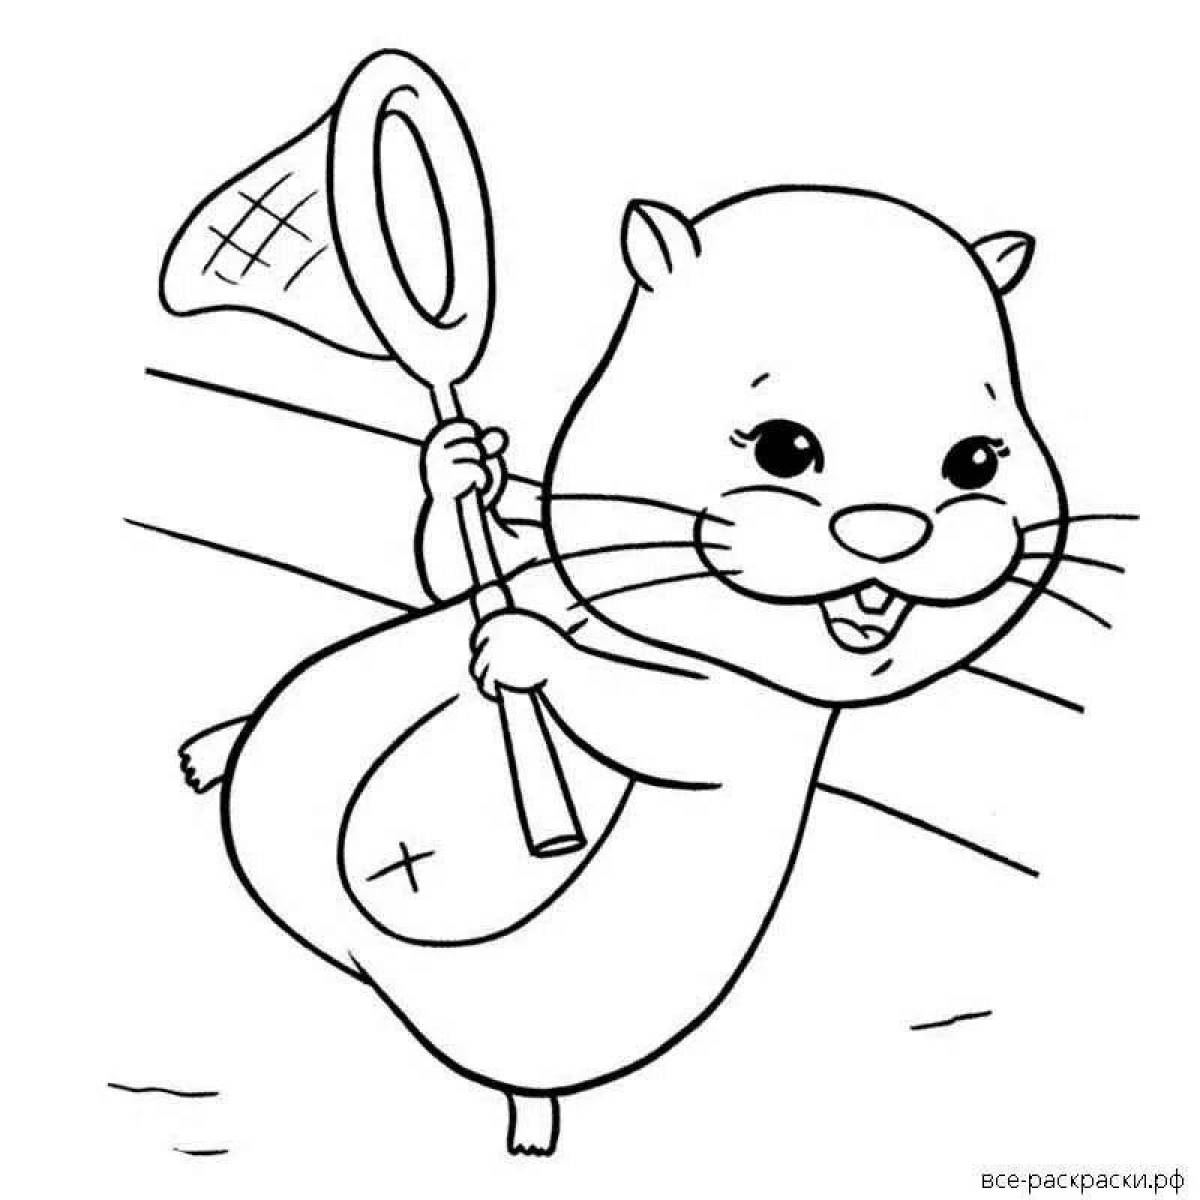 Fun coloring pages for hamsters